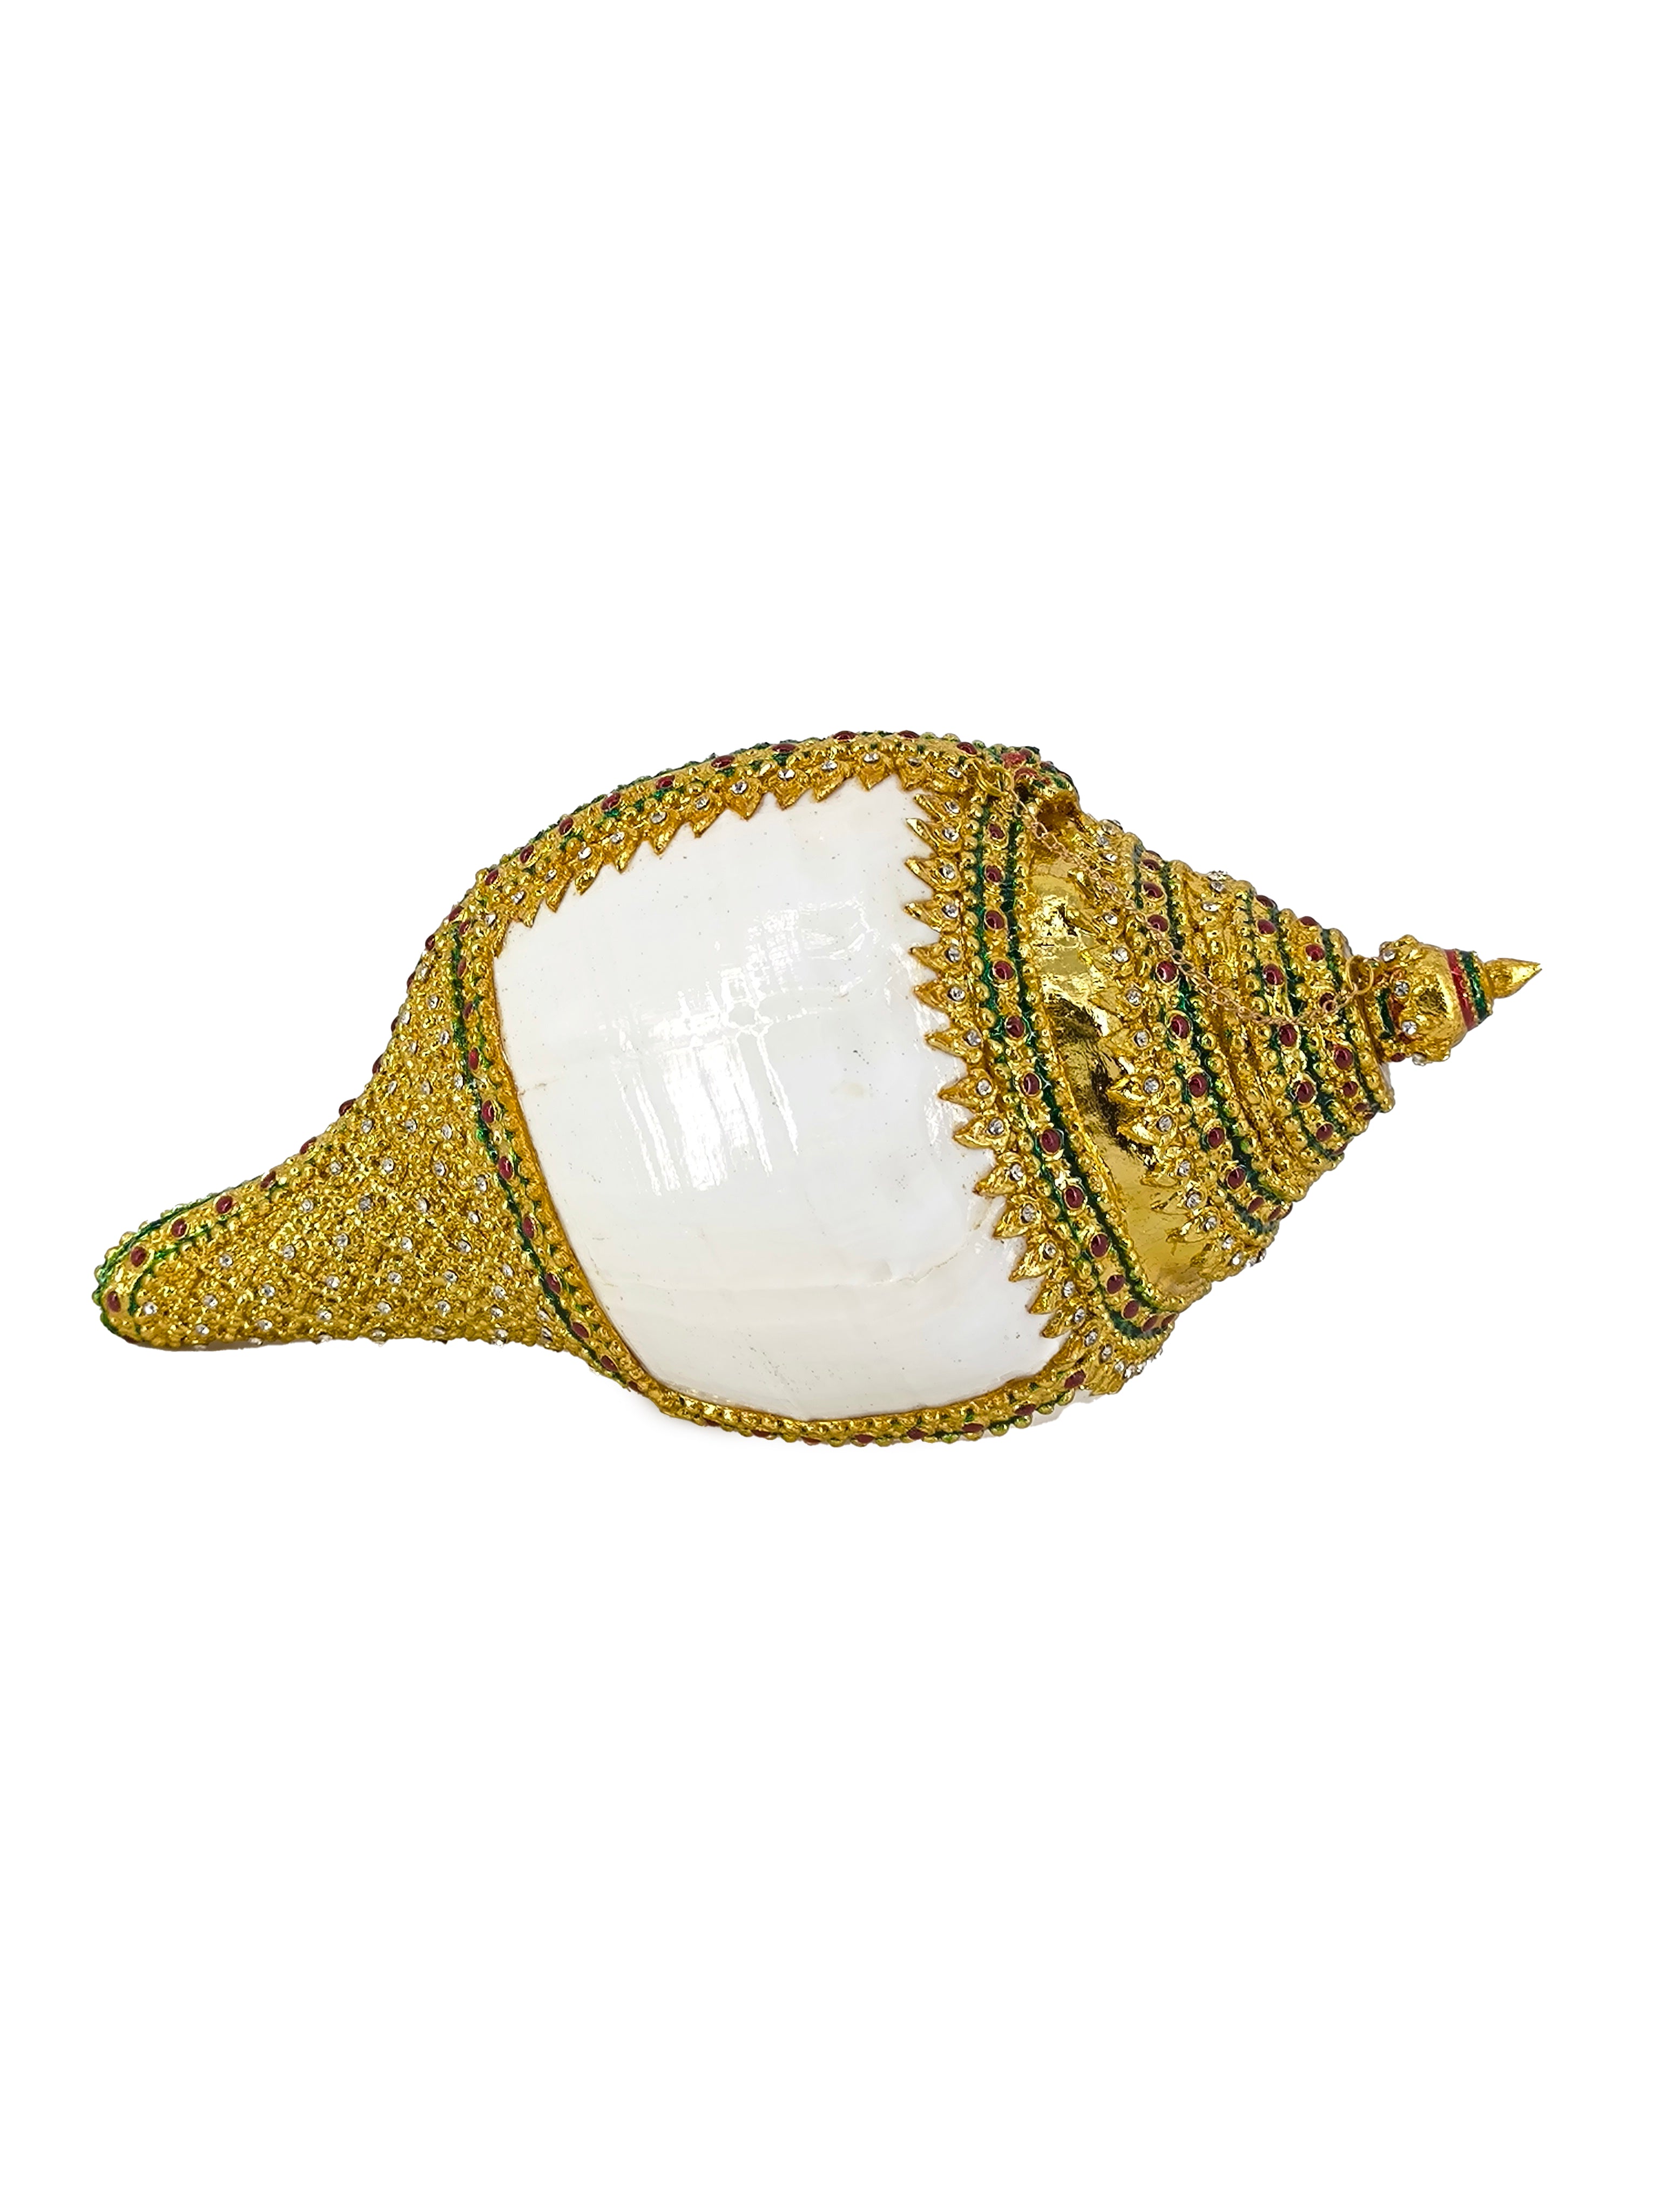 Conch shell decorated with synthetic diamonds and real gold.